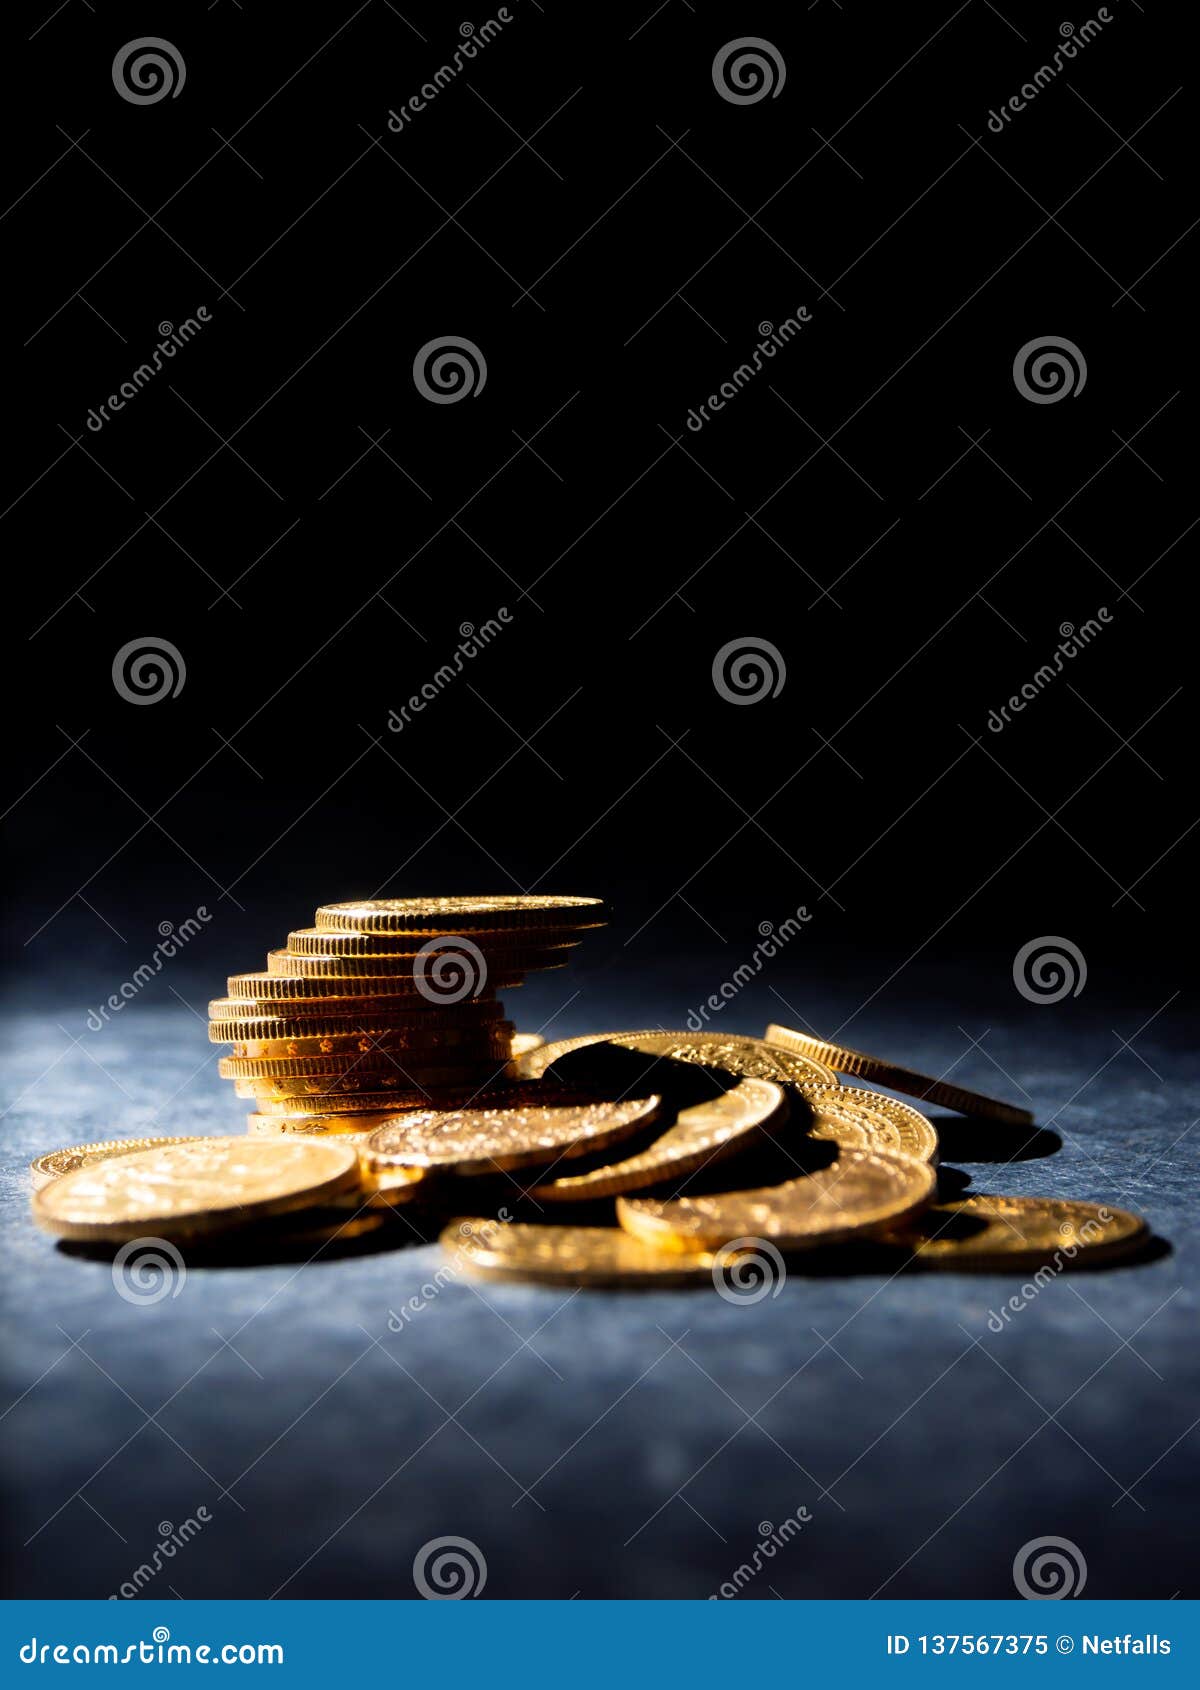 Gold Coins Over Dark Background Stock Image - Image of wealth, business